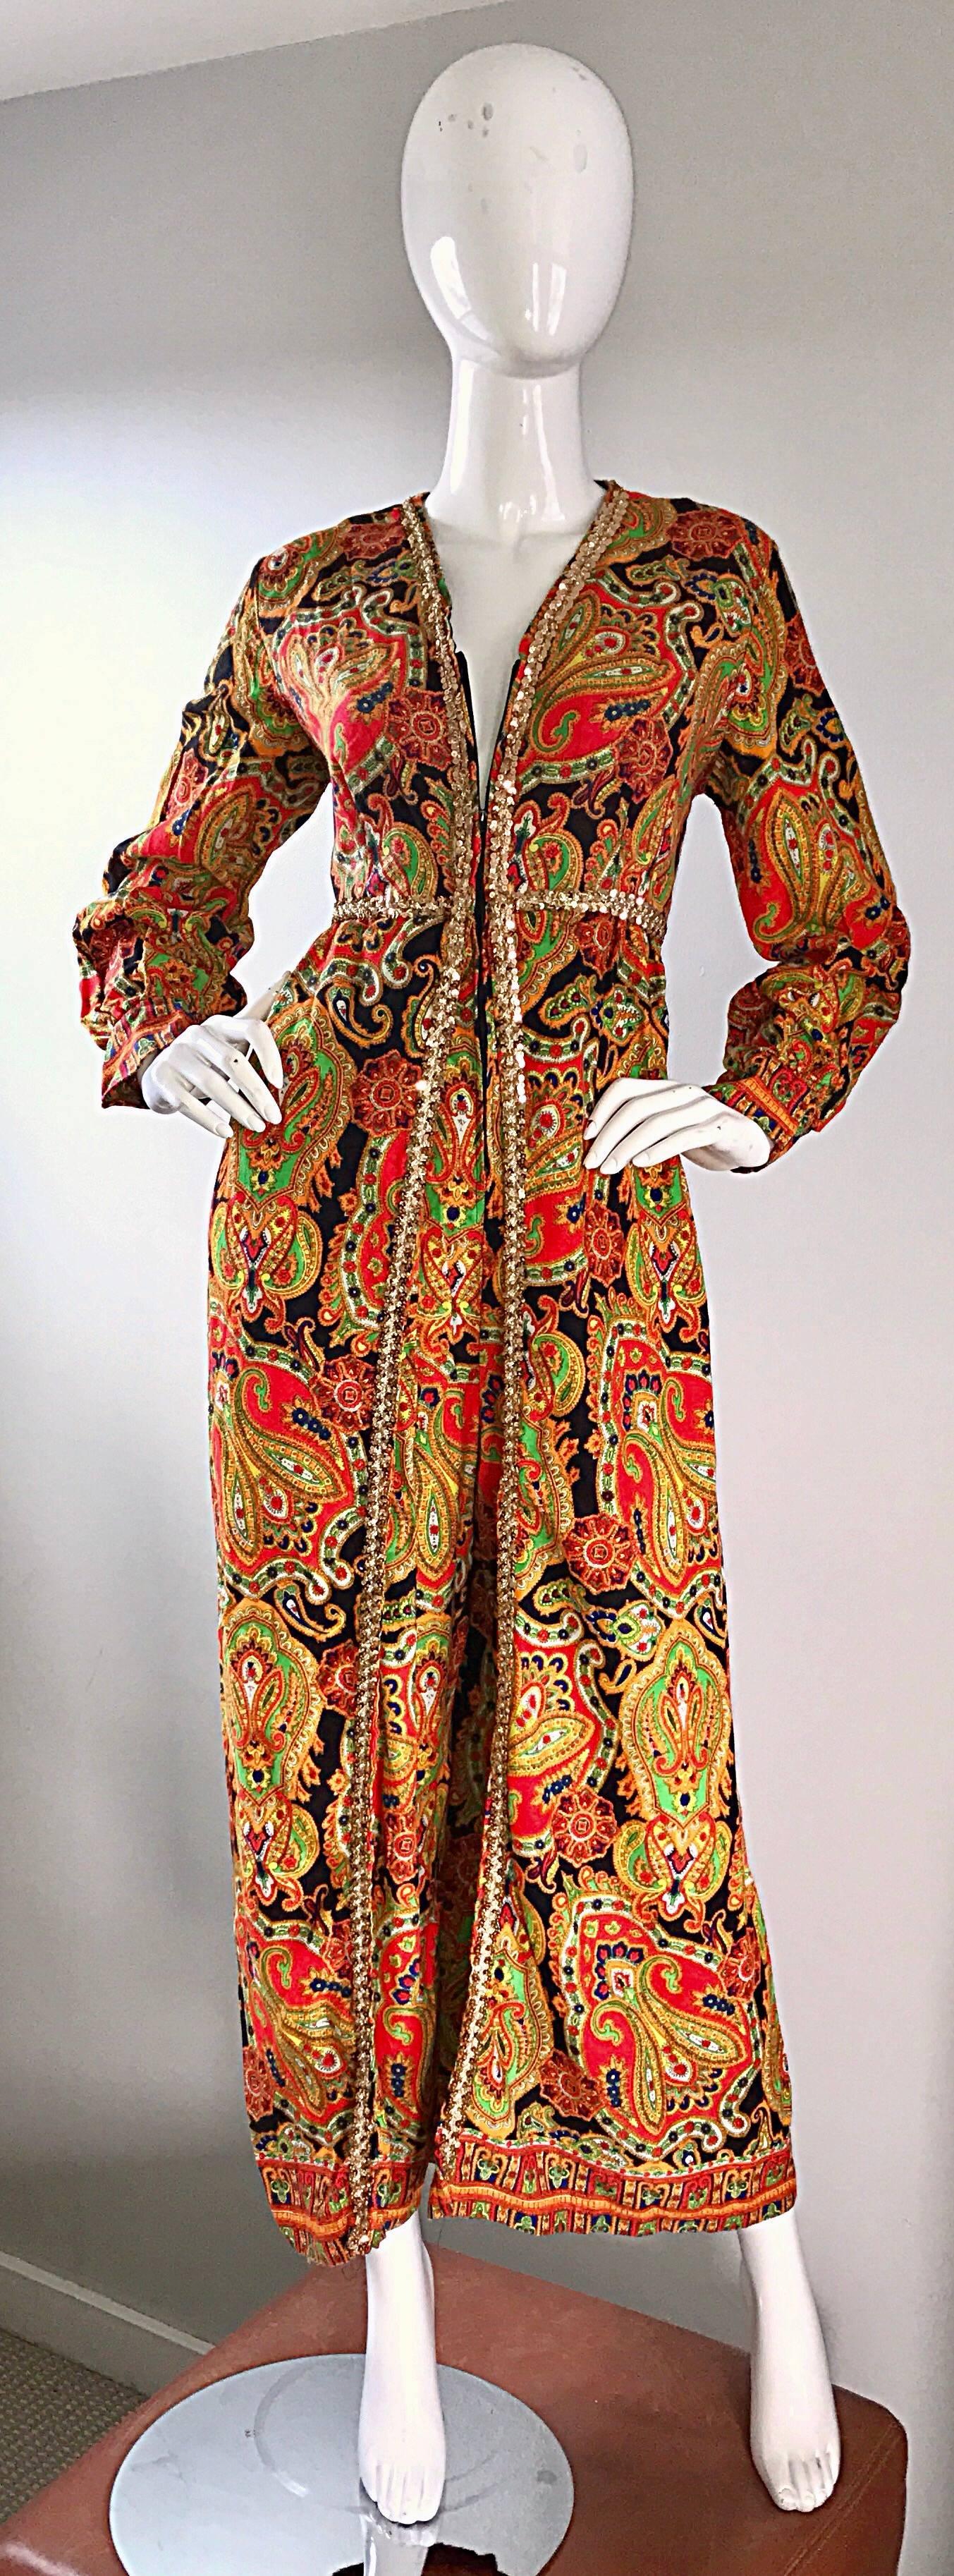 Amazing 1970s Psychedelic Paisley Gold Sequin Long Sleeve Vintage 70s Jumpsuit 1